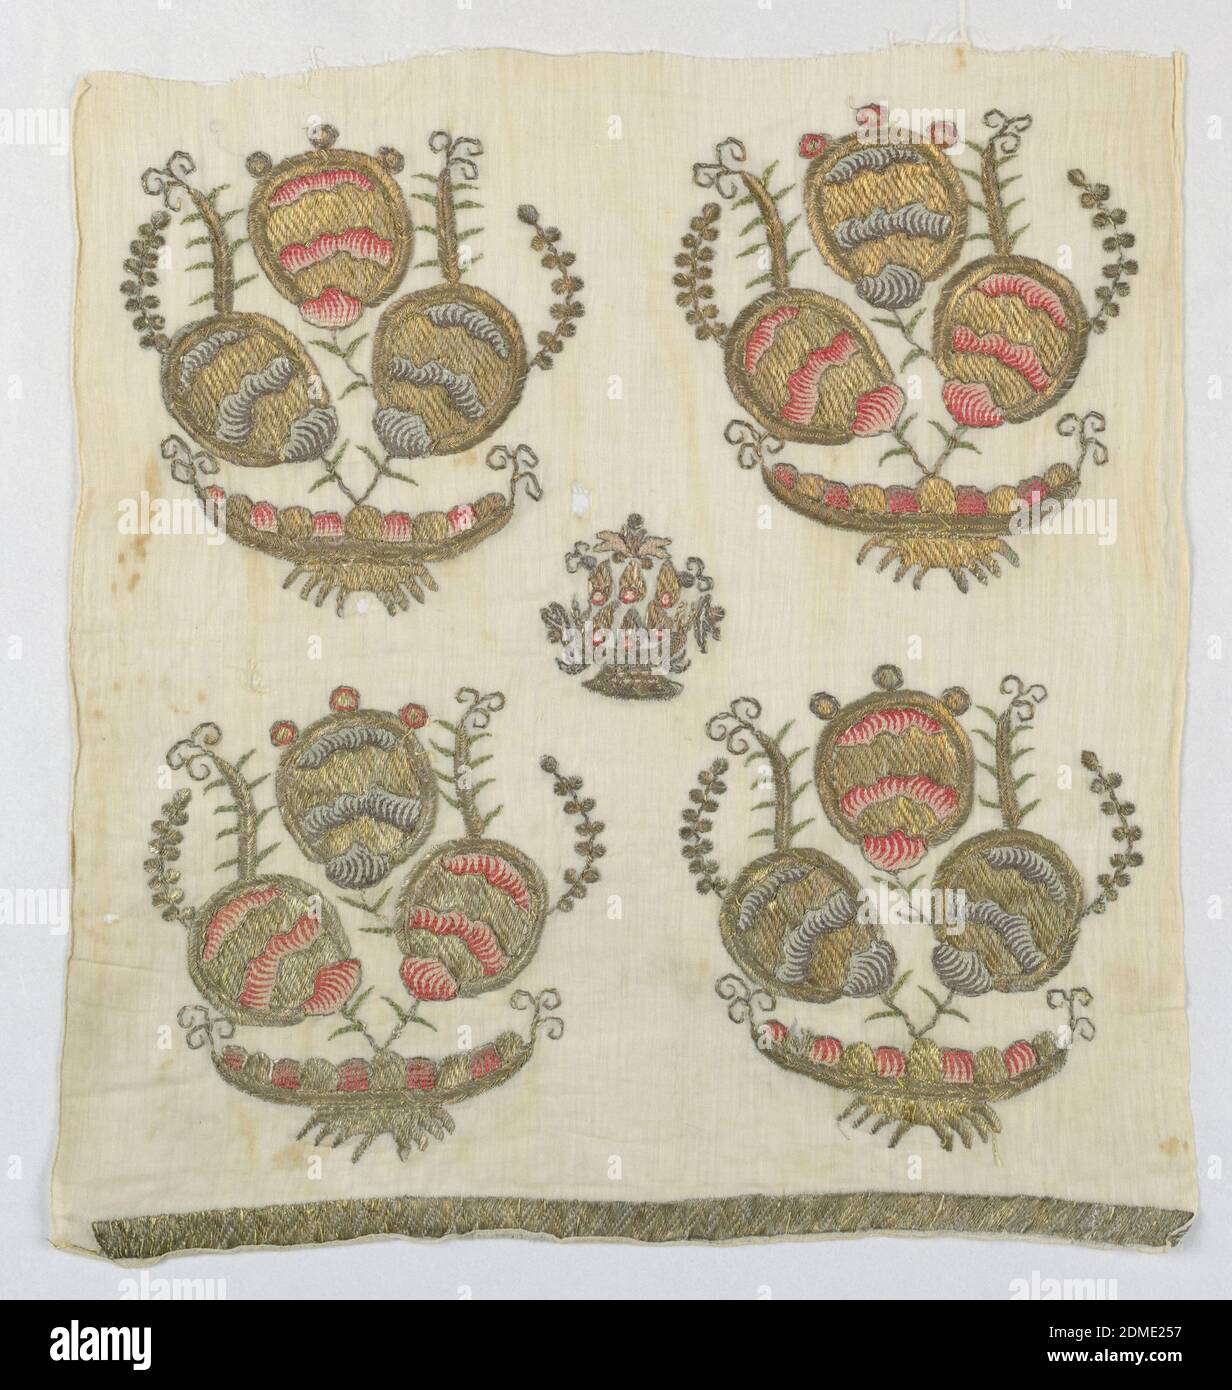 Sash ends, Medium: silk and metal-wrapped silk on cotton Technique: double running and satin stitches on plain weave, Two ends of an embroidered cover or sash, each with four units arranged in a square repeat (two units high, two units wide) of a flowering plant on a mound. In the center is a small basket of flowers. All in shades of red, blue, green and metallic gold., Turkey, late 19th century, embroidery & stitching, Sash ends Stock Photo